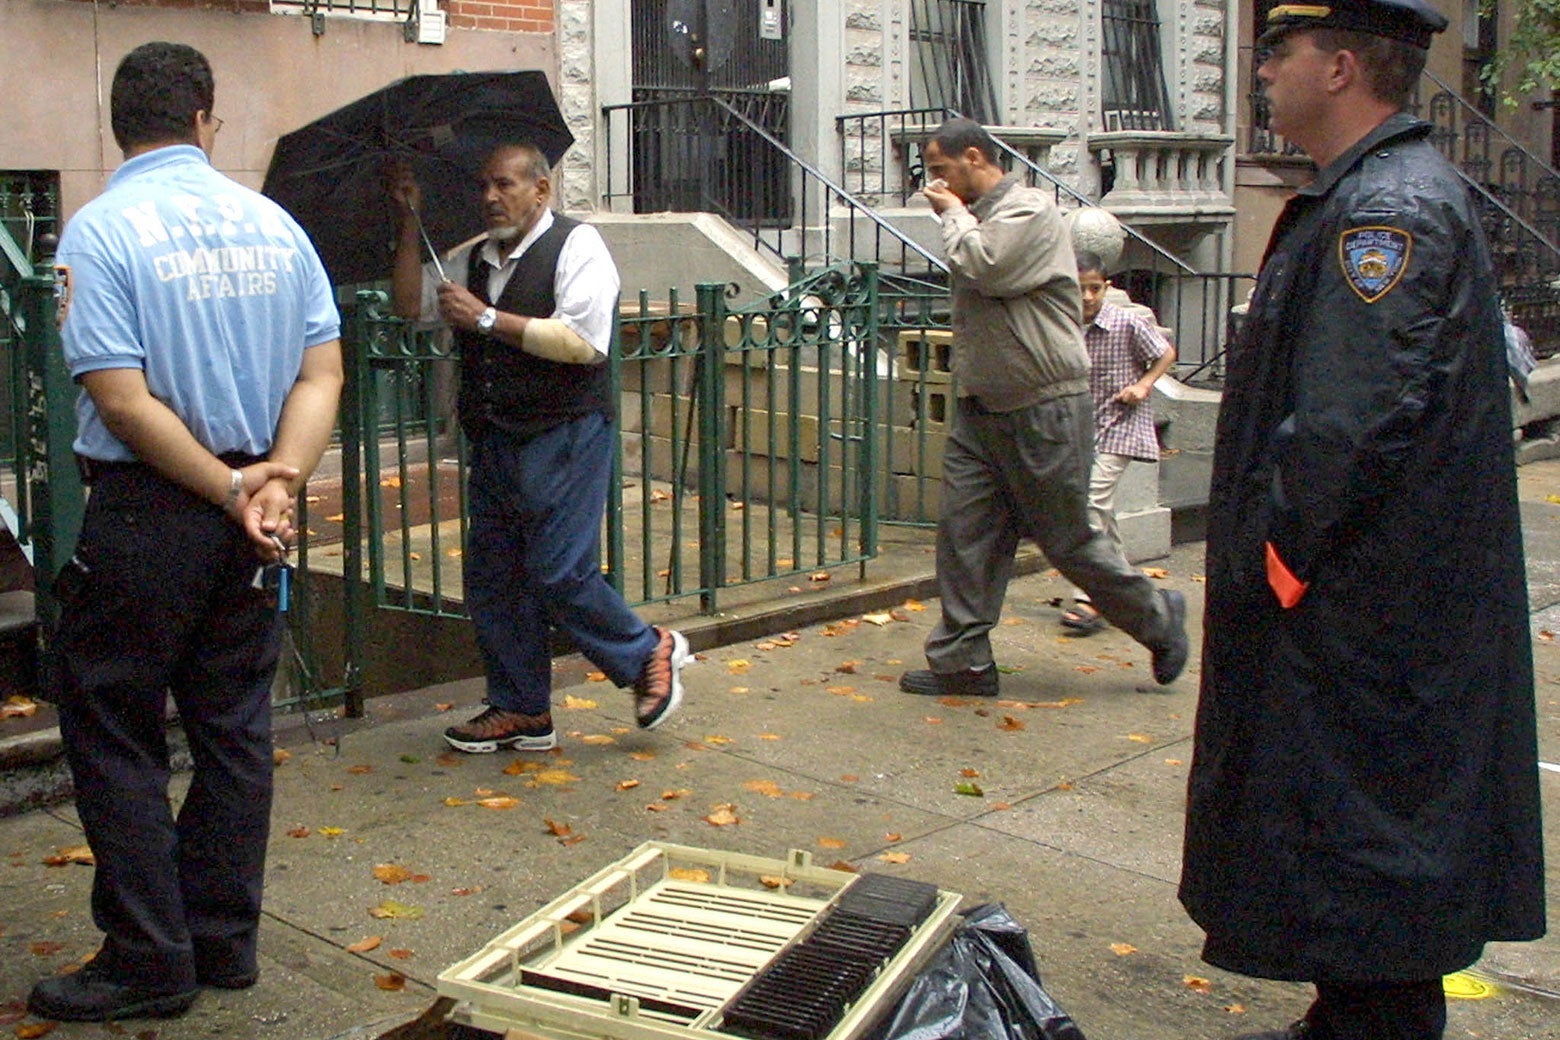 Worshippers at an Islamic center in the Brooklyn Heights neighborhood of Brooklyn, New York, pass a police officer dispatched for protection 14 September 2001. The officers were there as a precaution. 